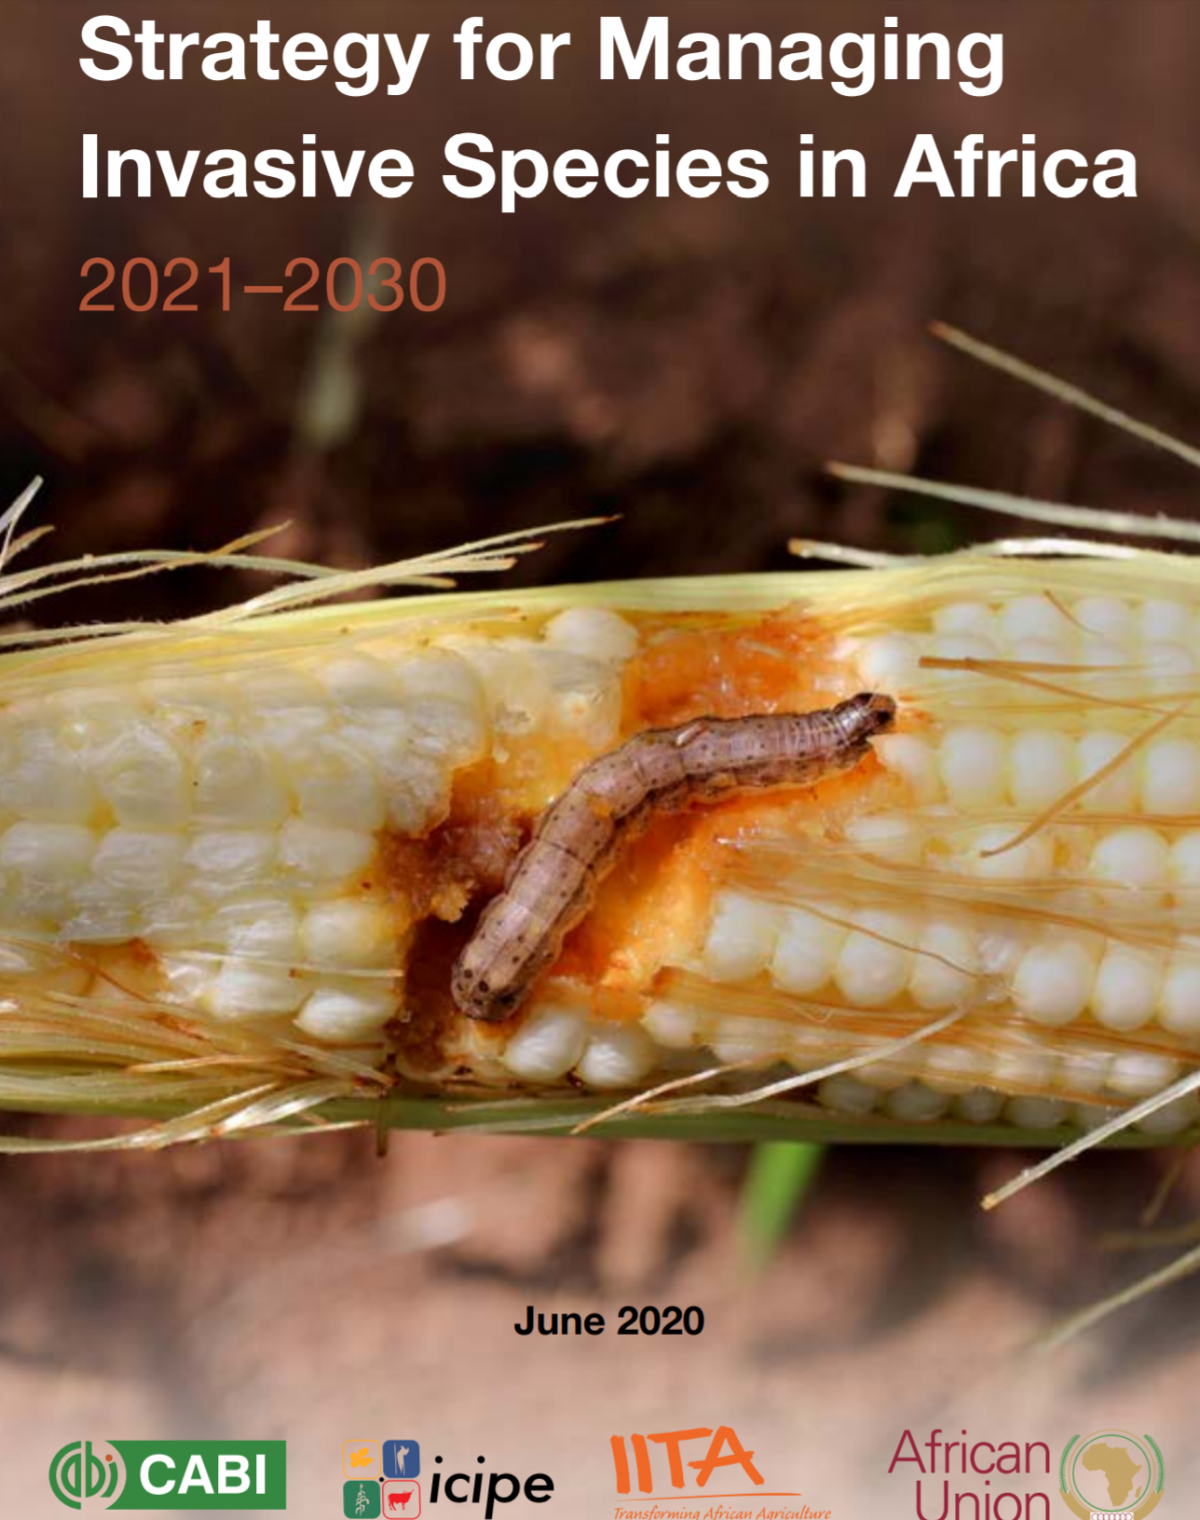 INTERNATIONAL INSTITUTE FOR TROPICAL AGRICULTURE RELEASES 10-YEAR STRATEGY FOR MANAGING INVASIVE SPECIES IN AFRICA